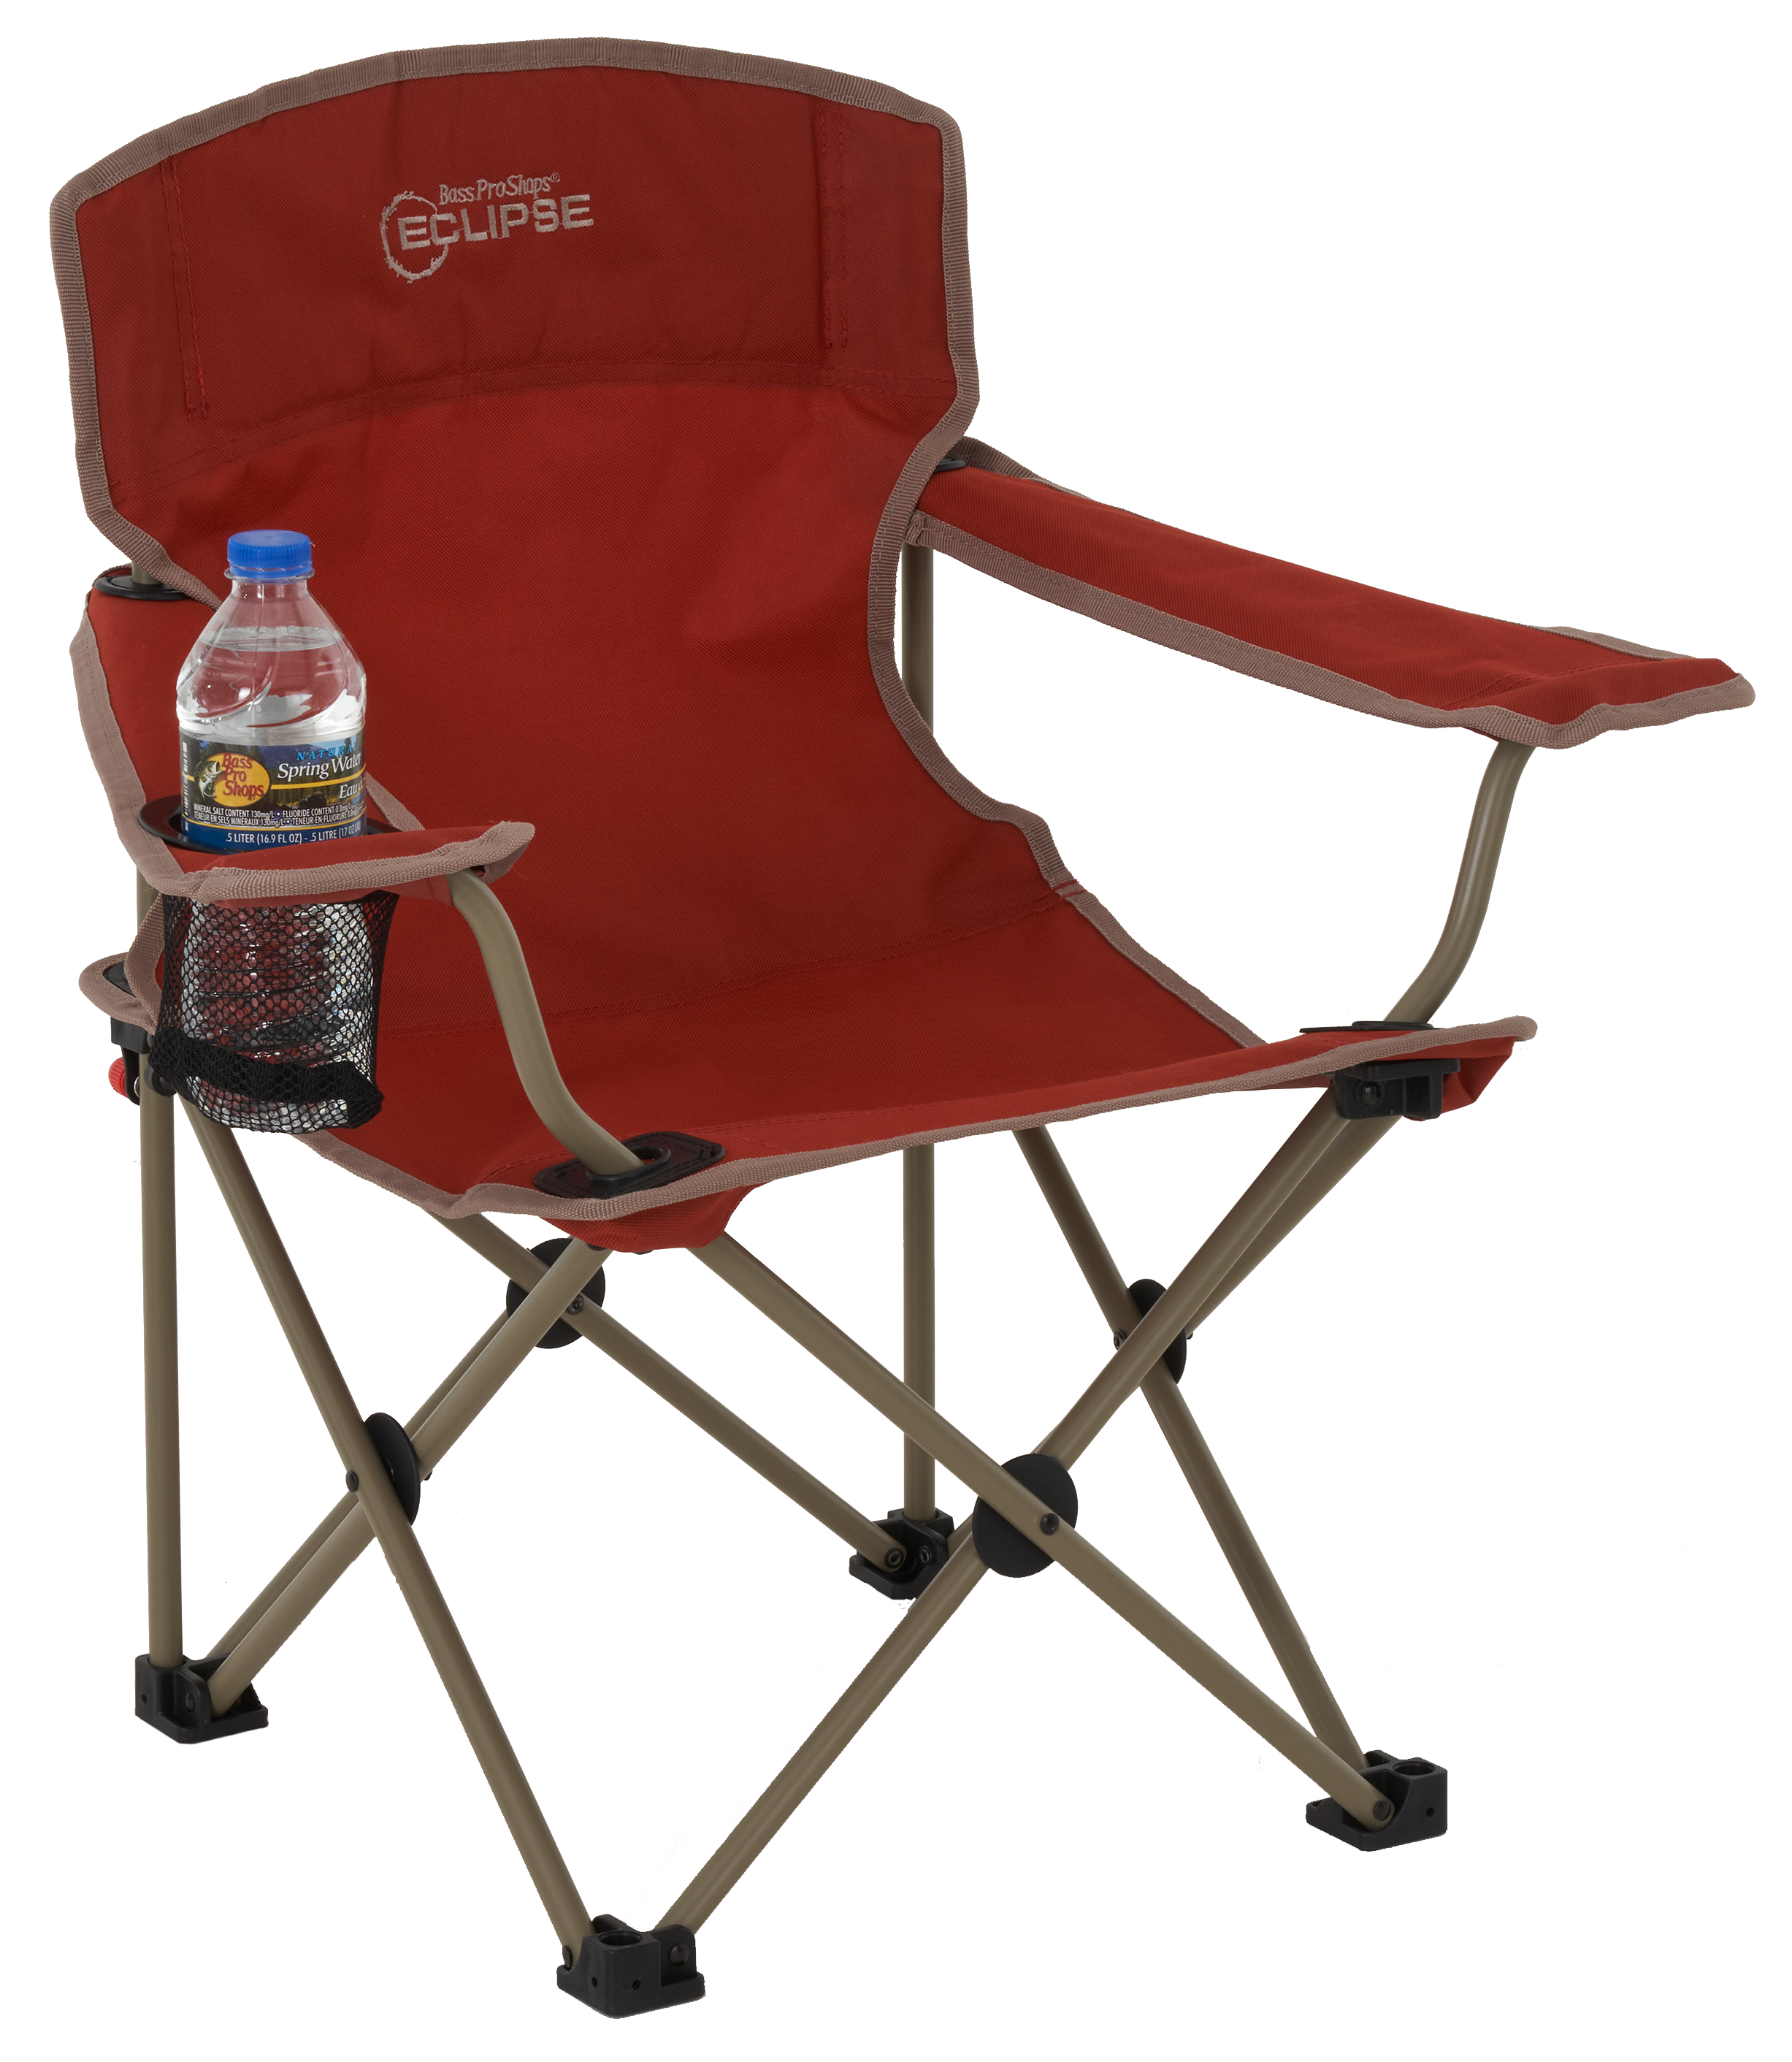 Bass Pro Shops Eclipse Camp Chair for Kids